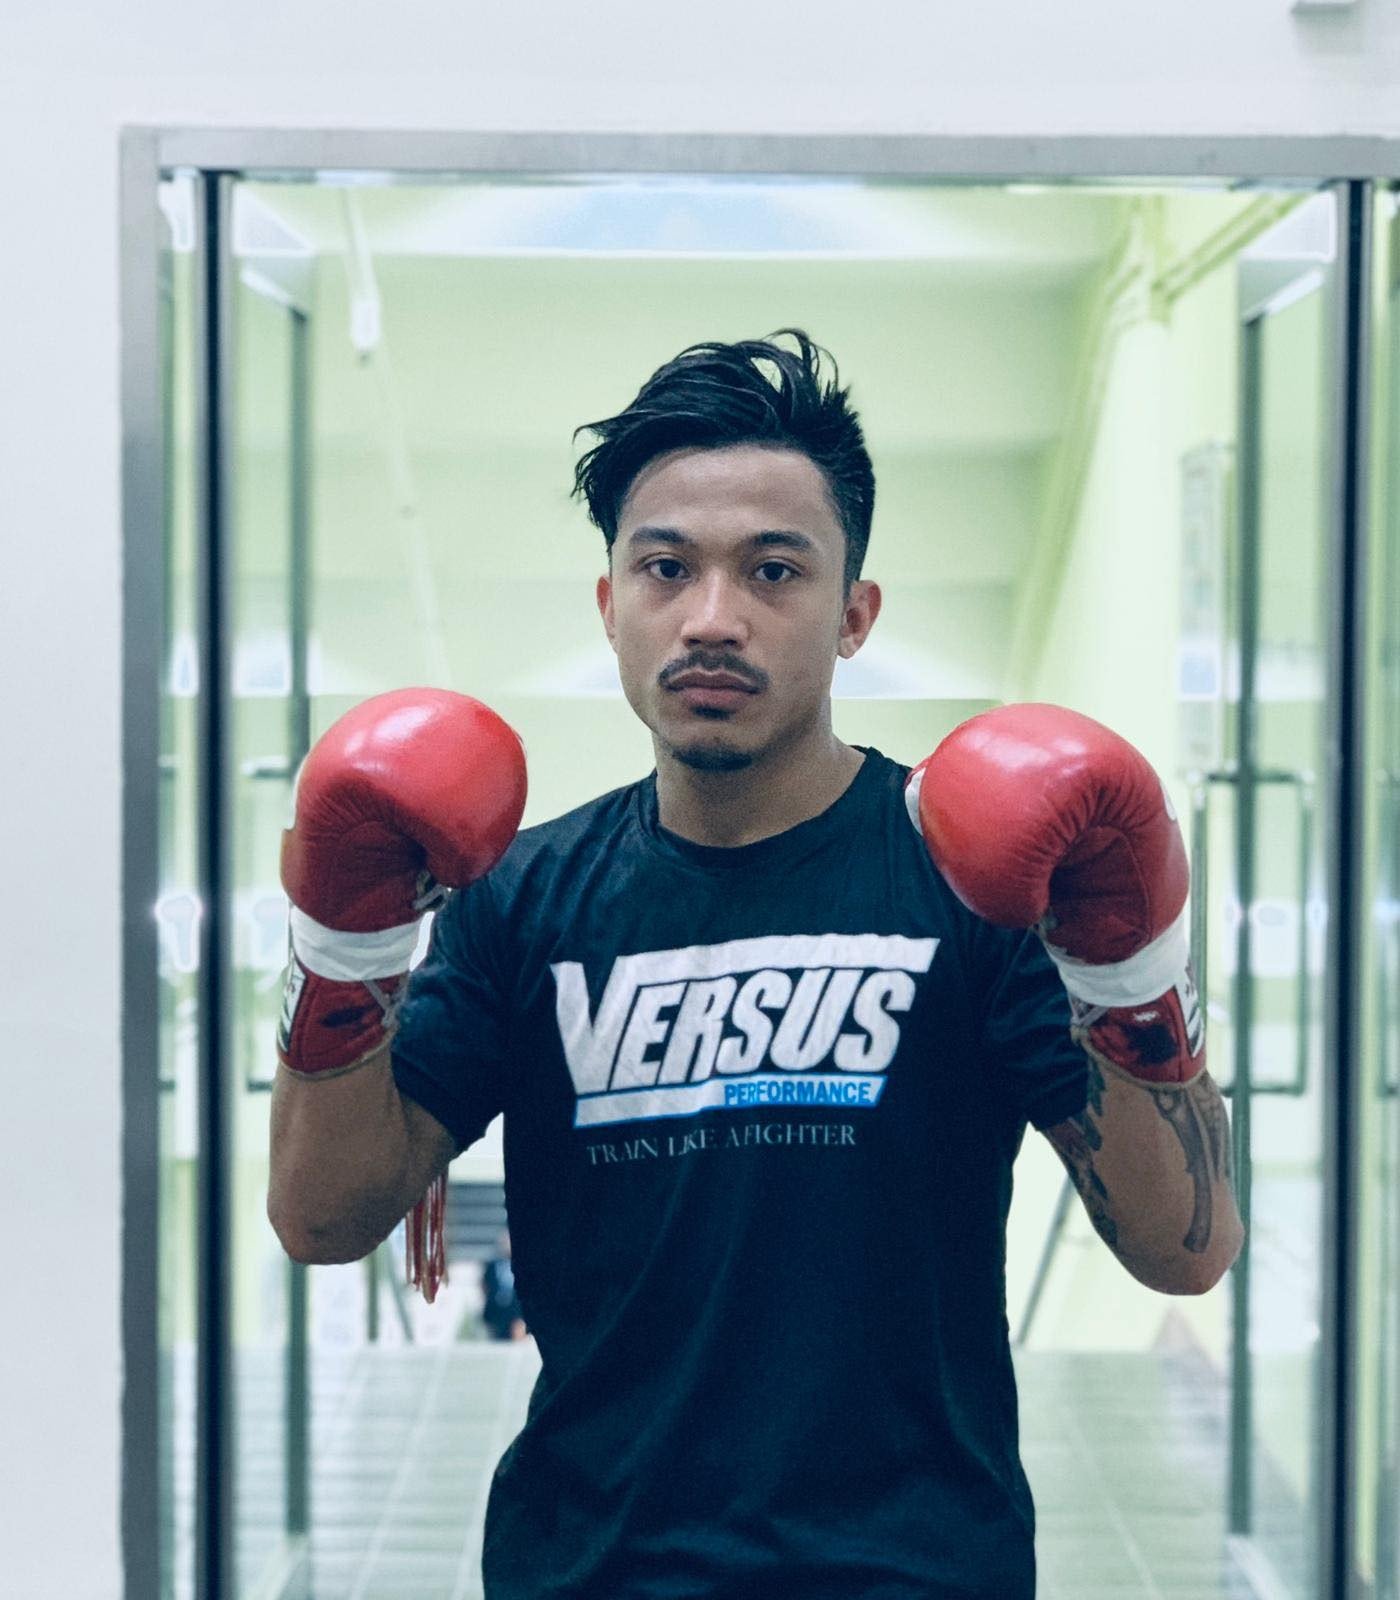 Hong Kong-born Michael Dacuno says the local Muay Thai scene has a stigma towards non-Chinese fighters.